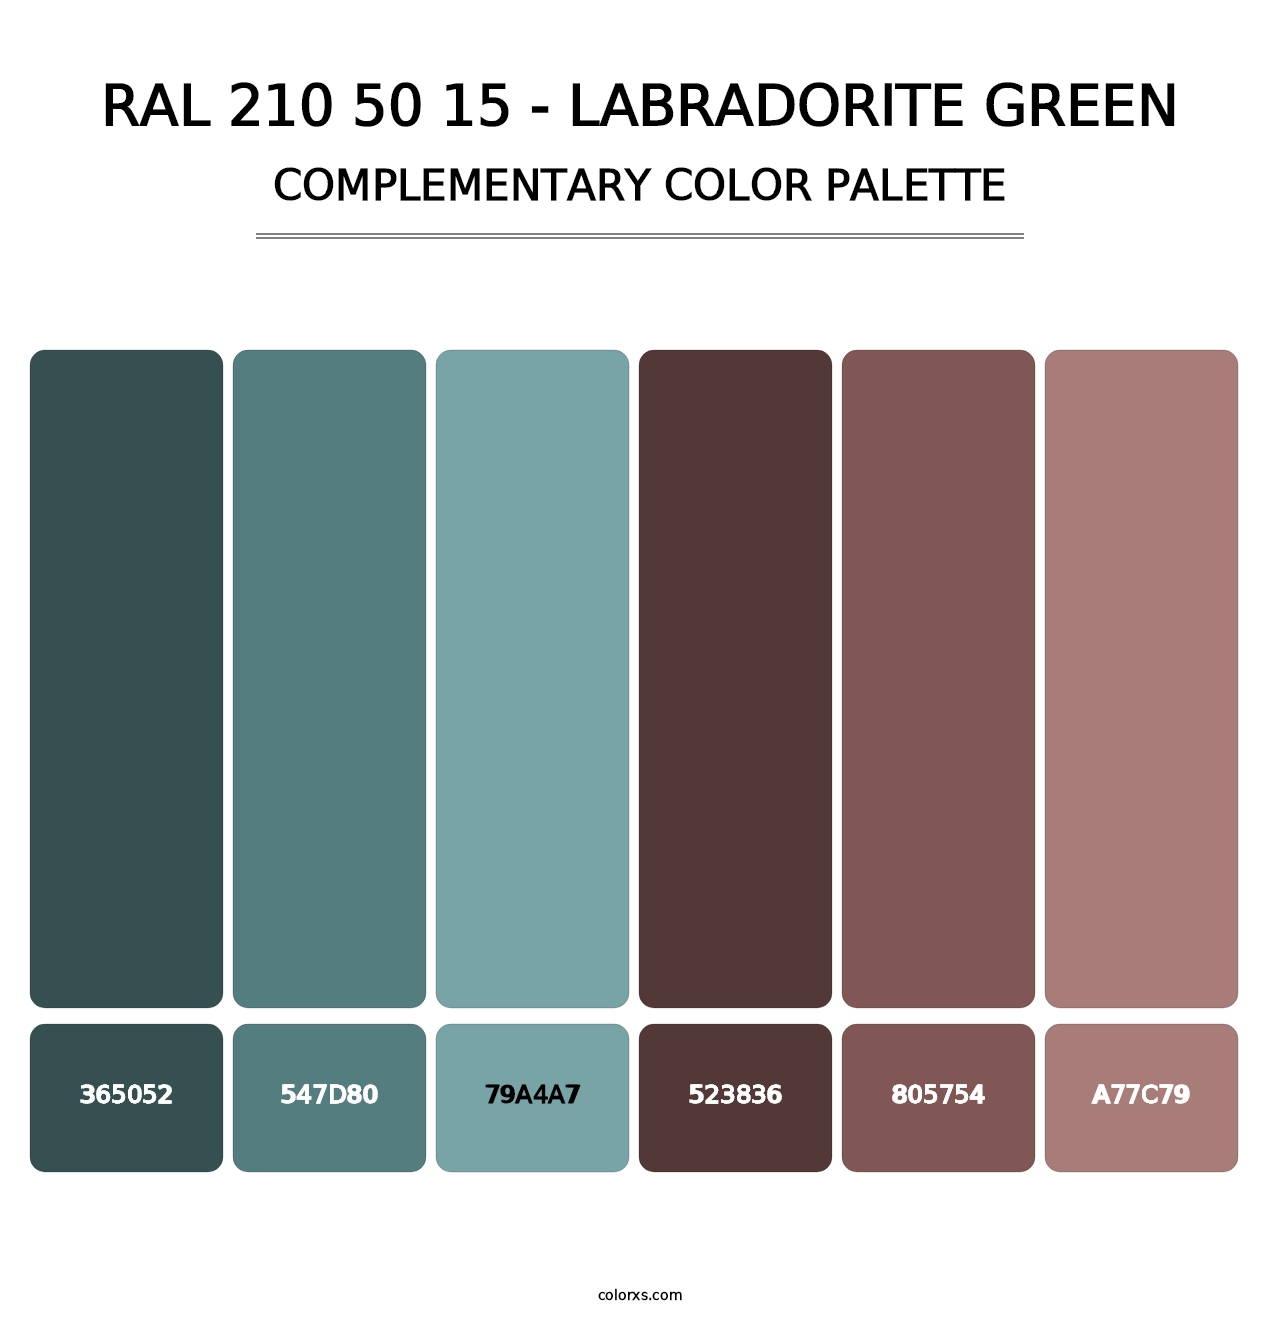 RAL 210 50 15 - Labradorite Green - Complementary Color Palette